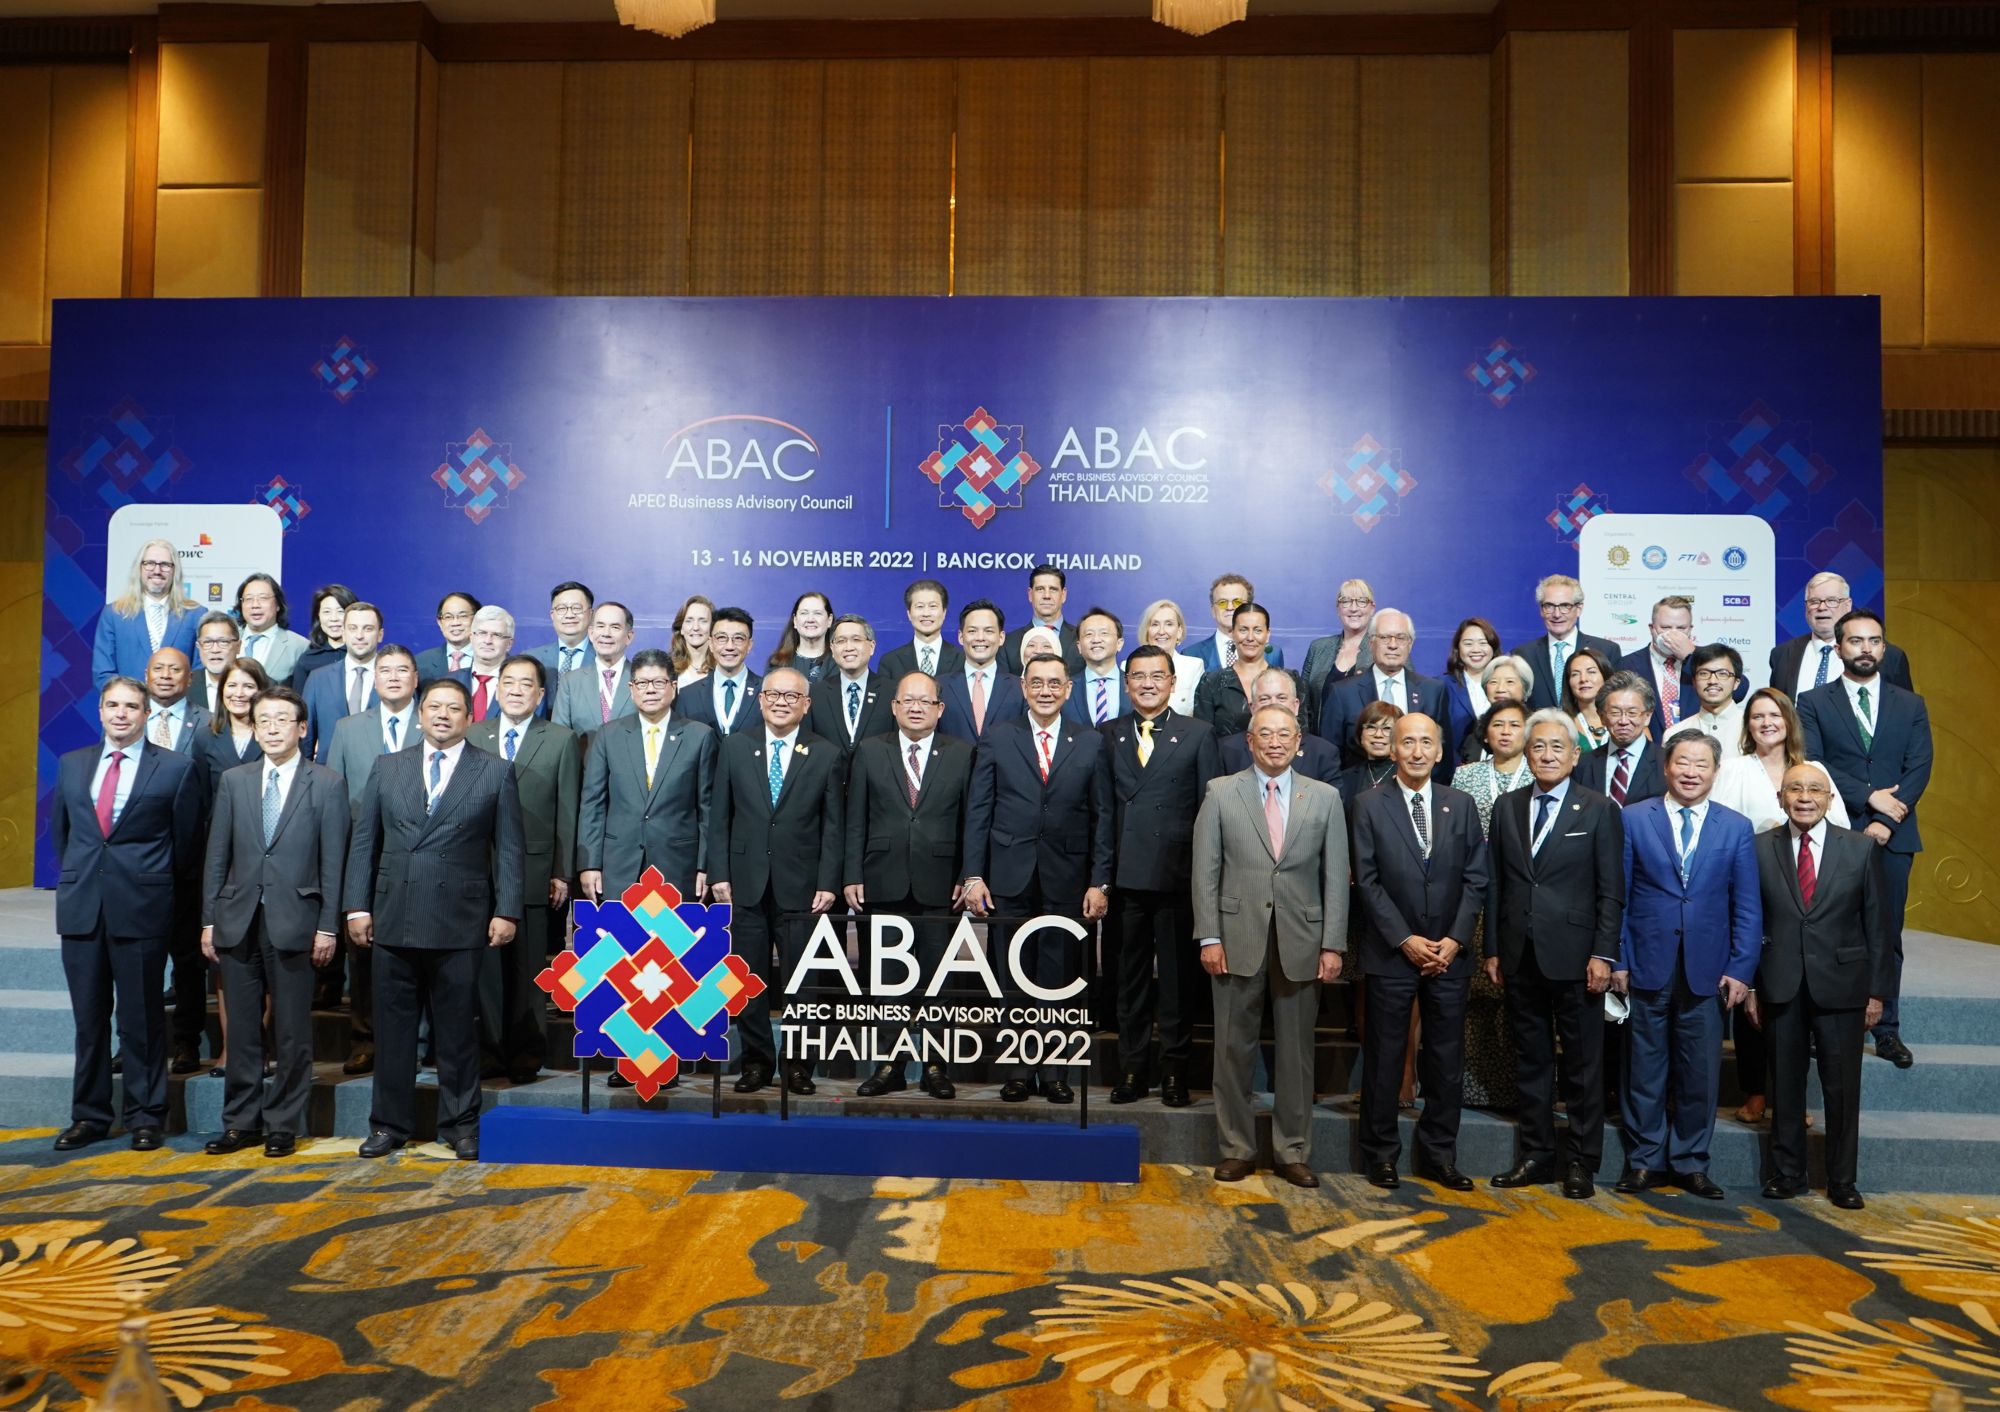 Aboitiz to ABAC leaders: “People are the heart and soul of economies”